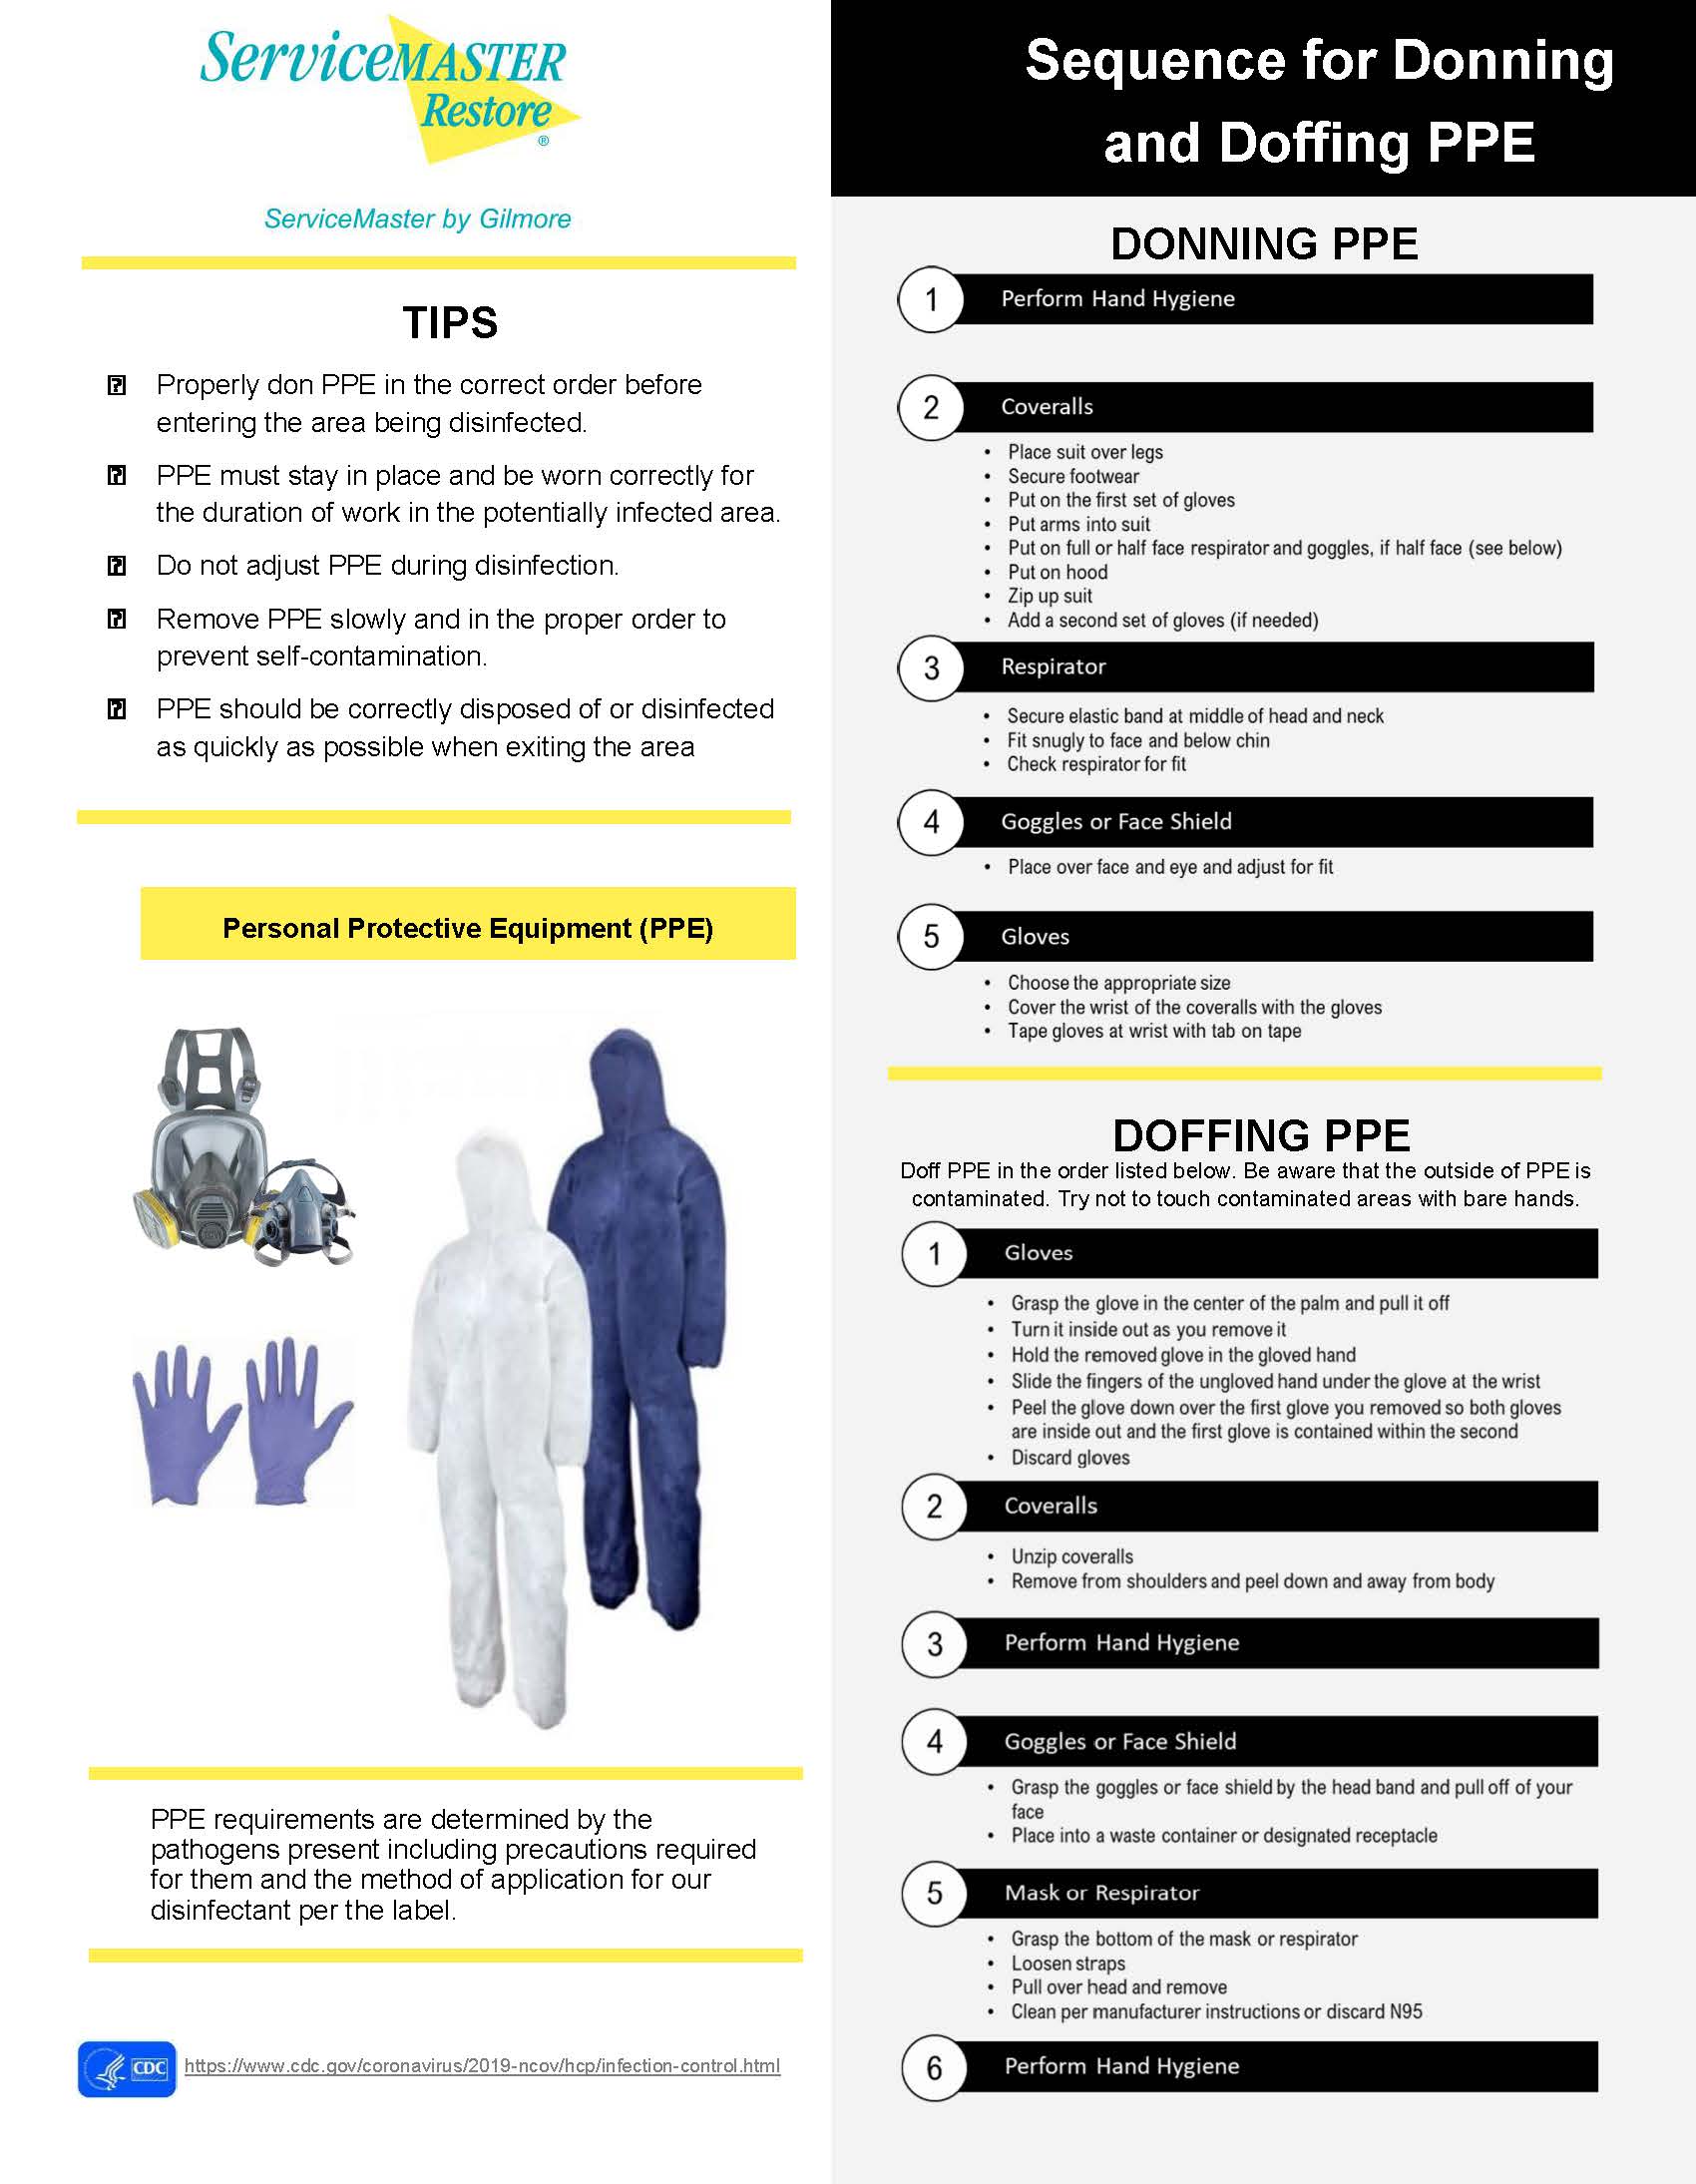 sequence for donning and doffing ppe